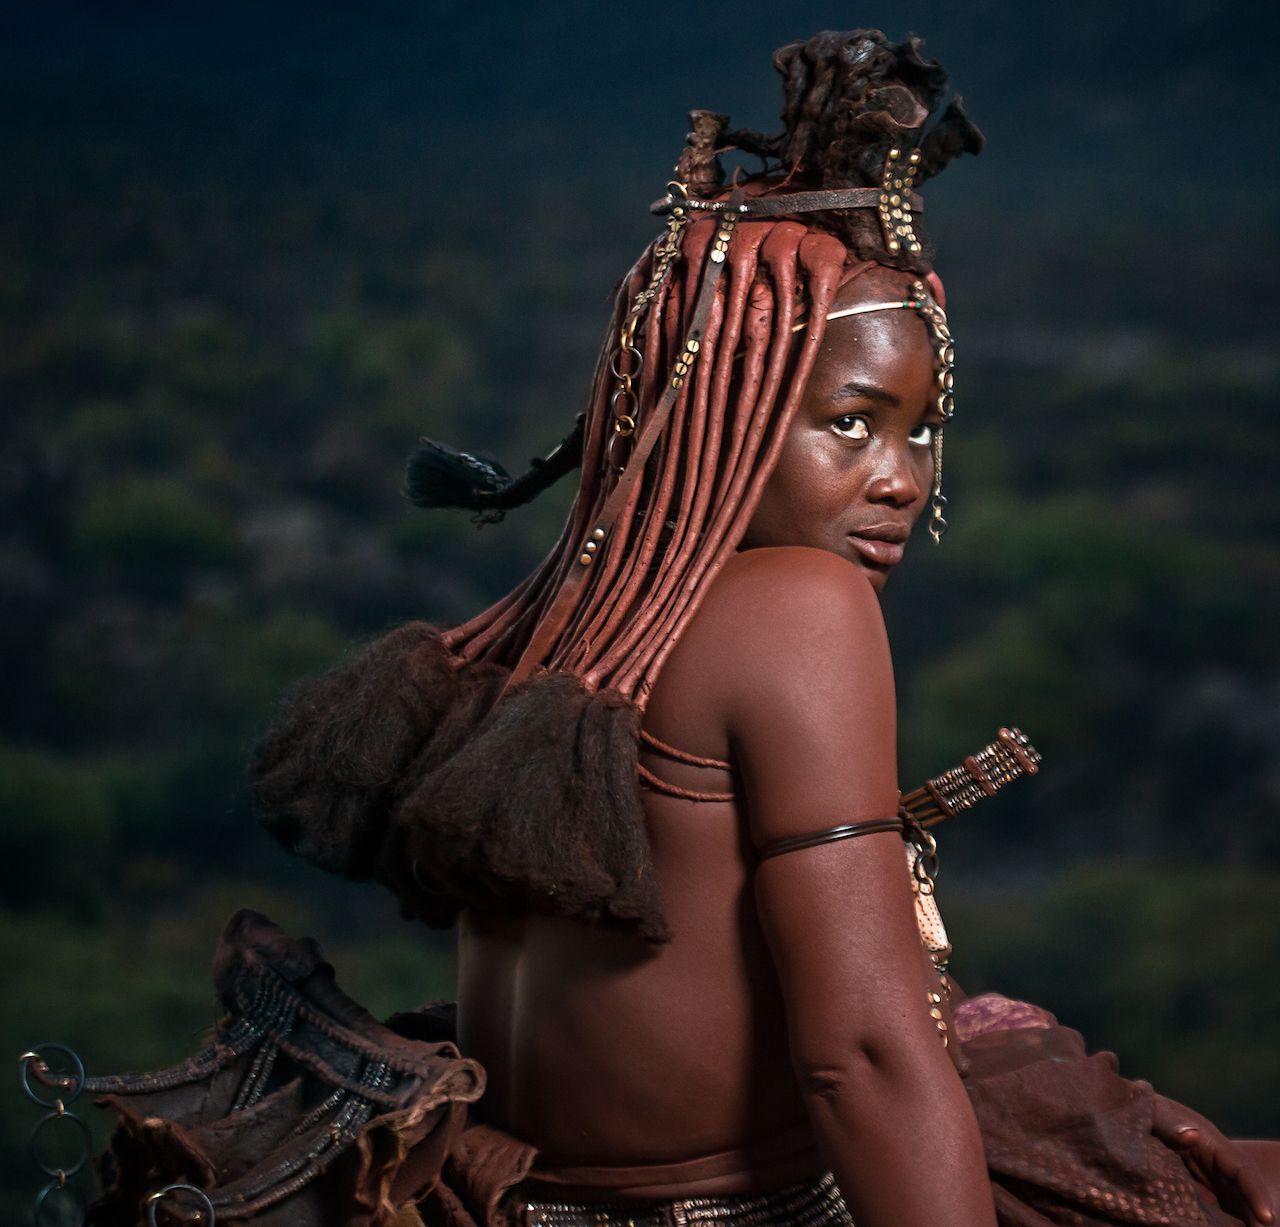 Discover the Himba people of Namibia